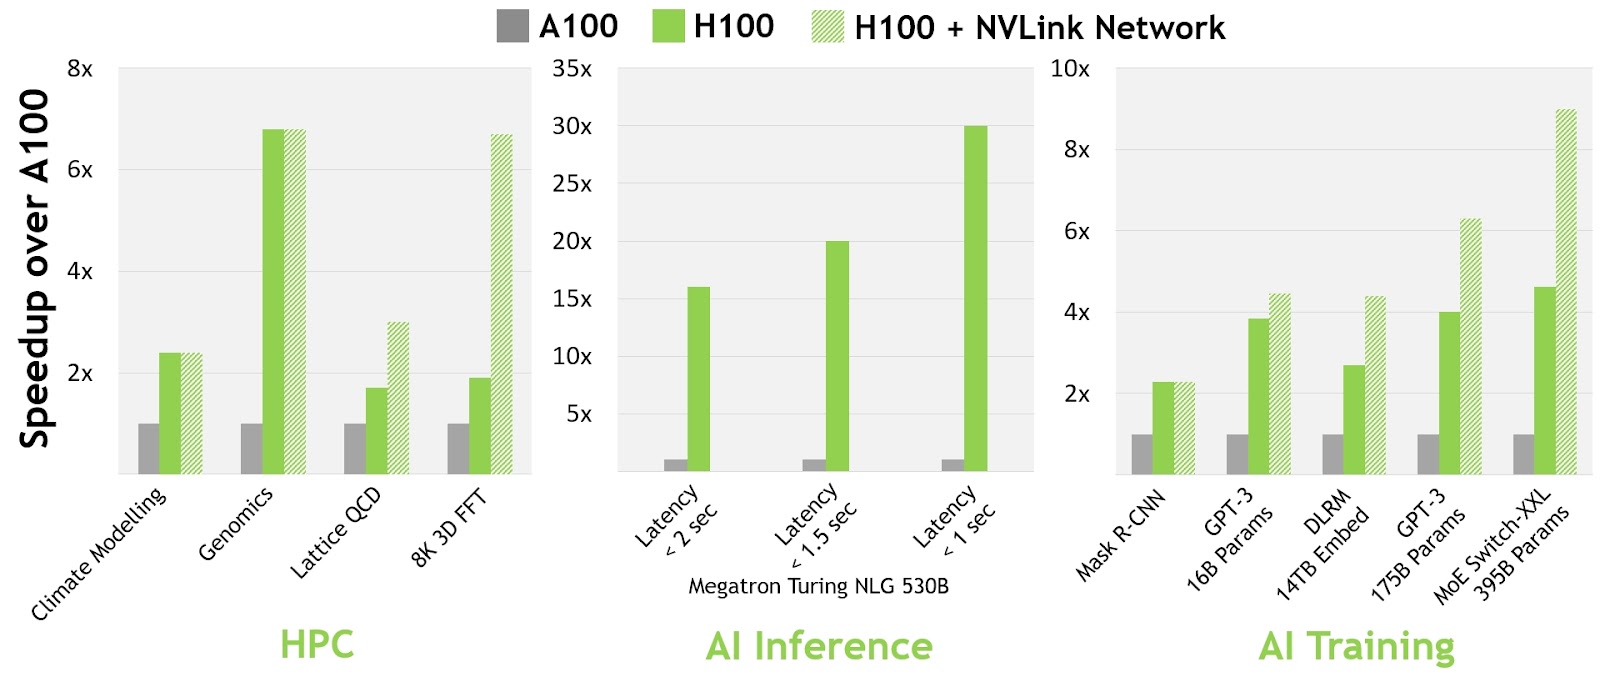 Comparison of DGX A100 H100 and H100 + NVLink Network